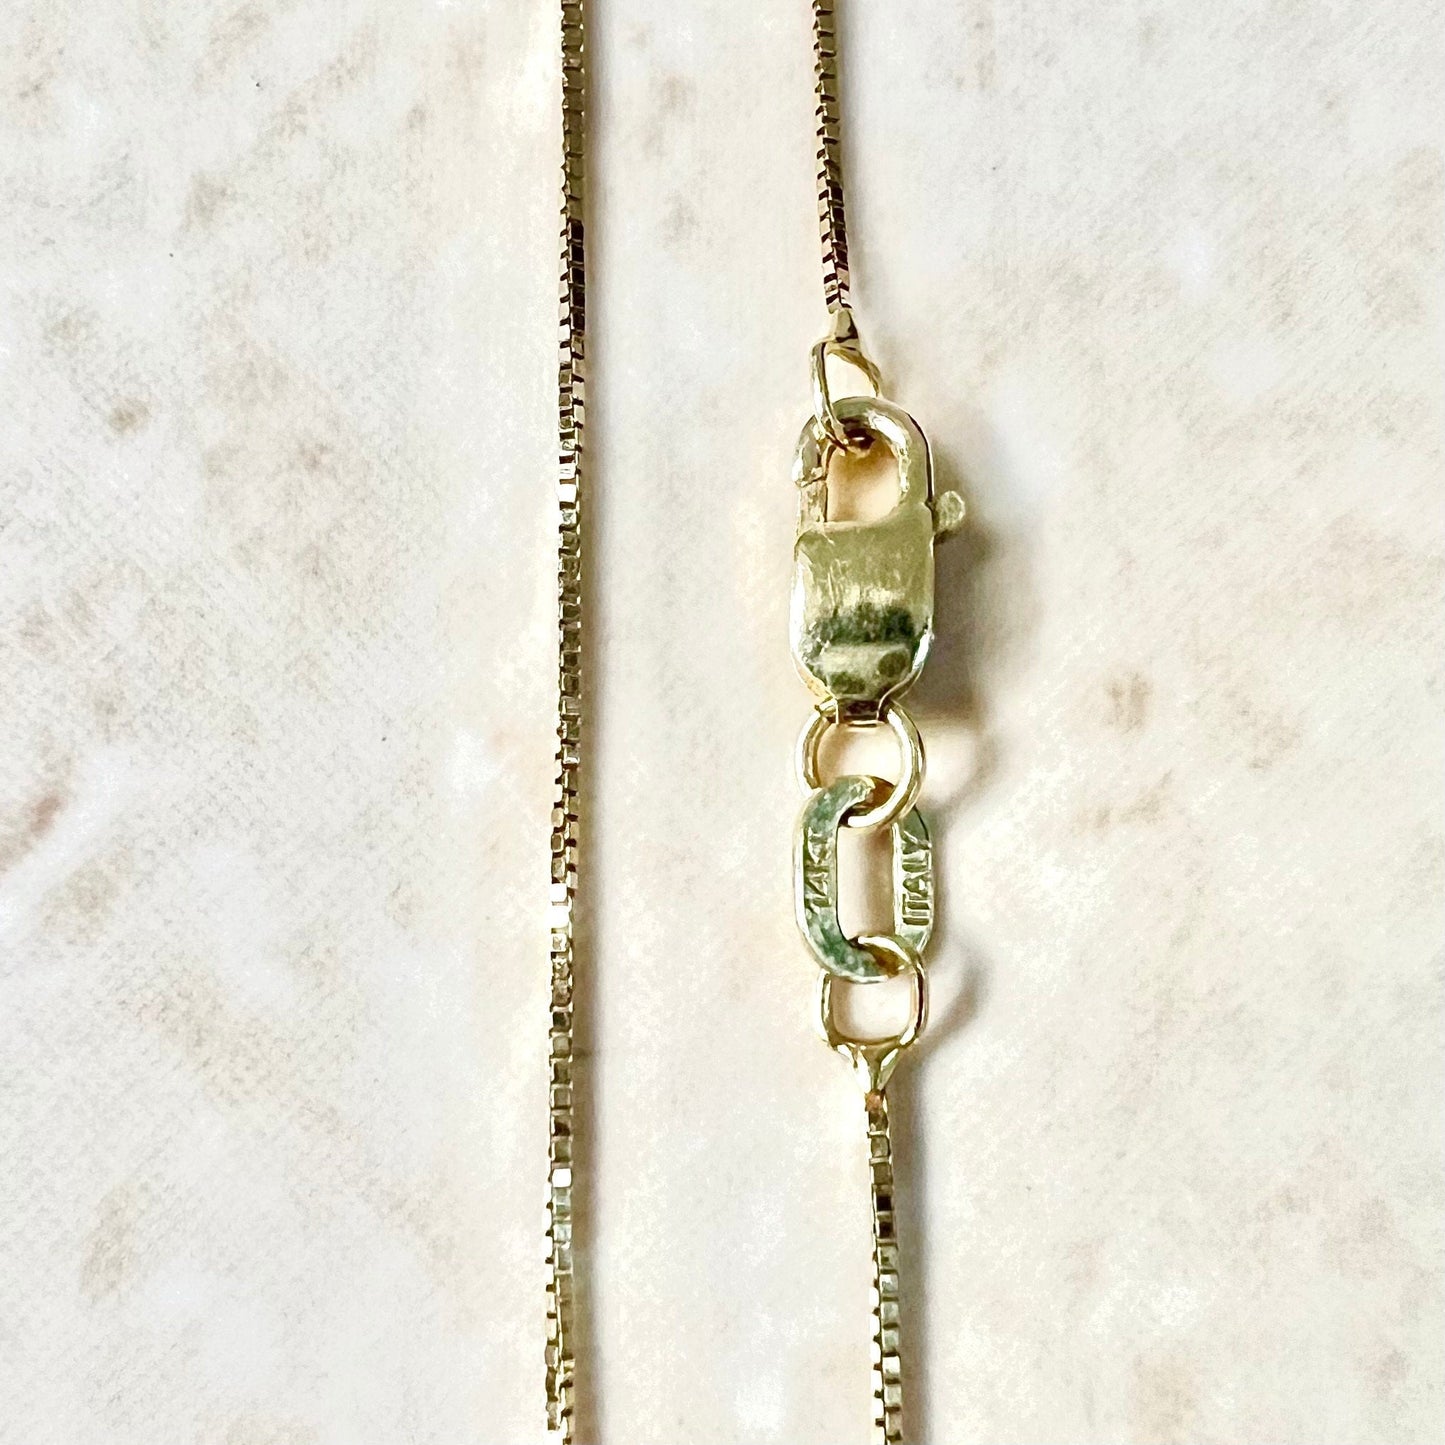 Vintage Italian 14K Yellow Gold Box Chain Necklace - 18 Inch Gold Chain Necklace - Yellow Gold Necklace - Everyday Necklace - Christmas Gift